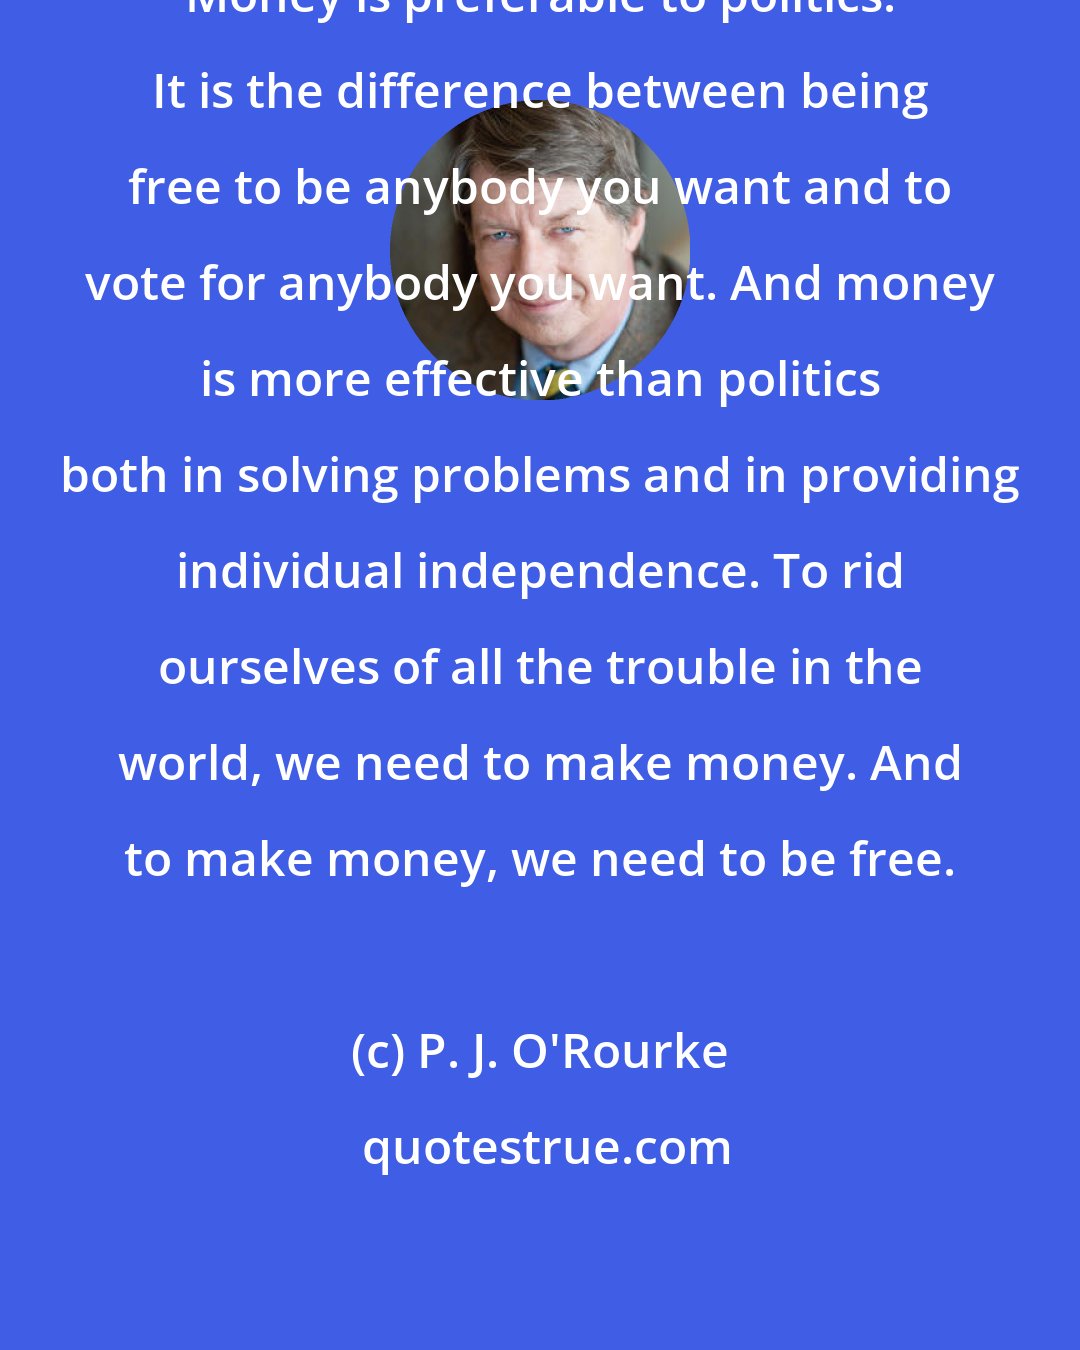 P. J. O'Rourke: Money is preferable to politics. It is the difference between being free to be anybody you want and to vote for anybody you want. And money is more effective than politics both in solving problems and in providing individual independence. To rid ourselves of all the trouble in the world, we need to make money. And to make money, we need to be free.